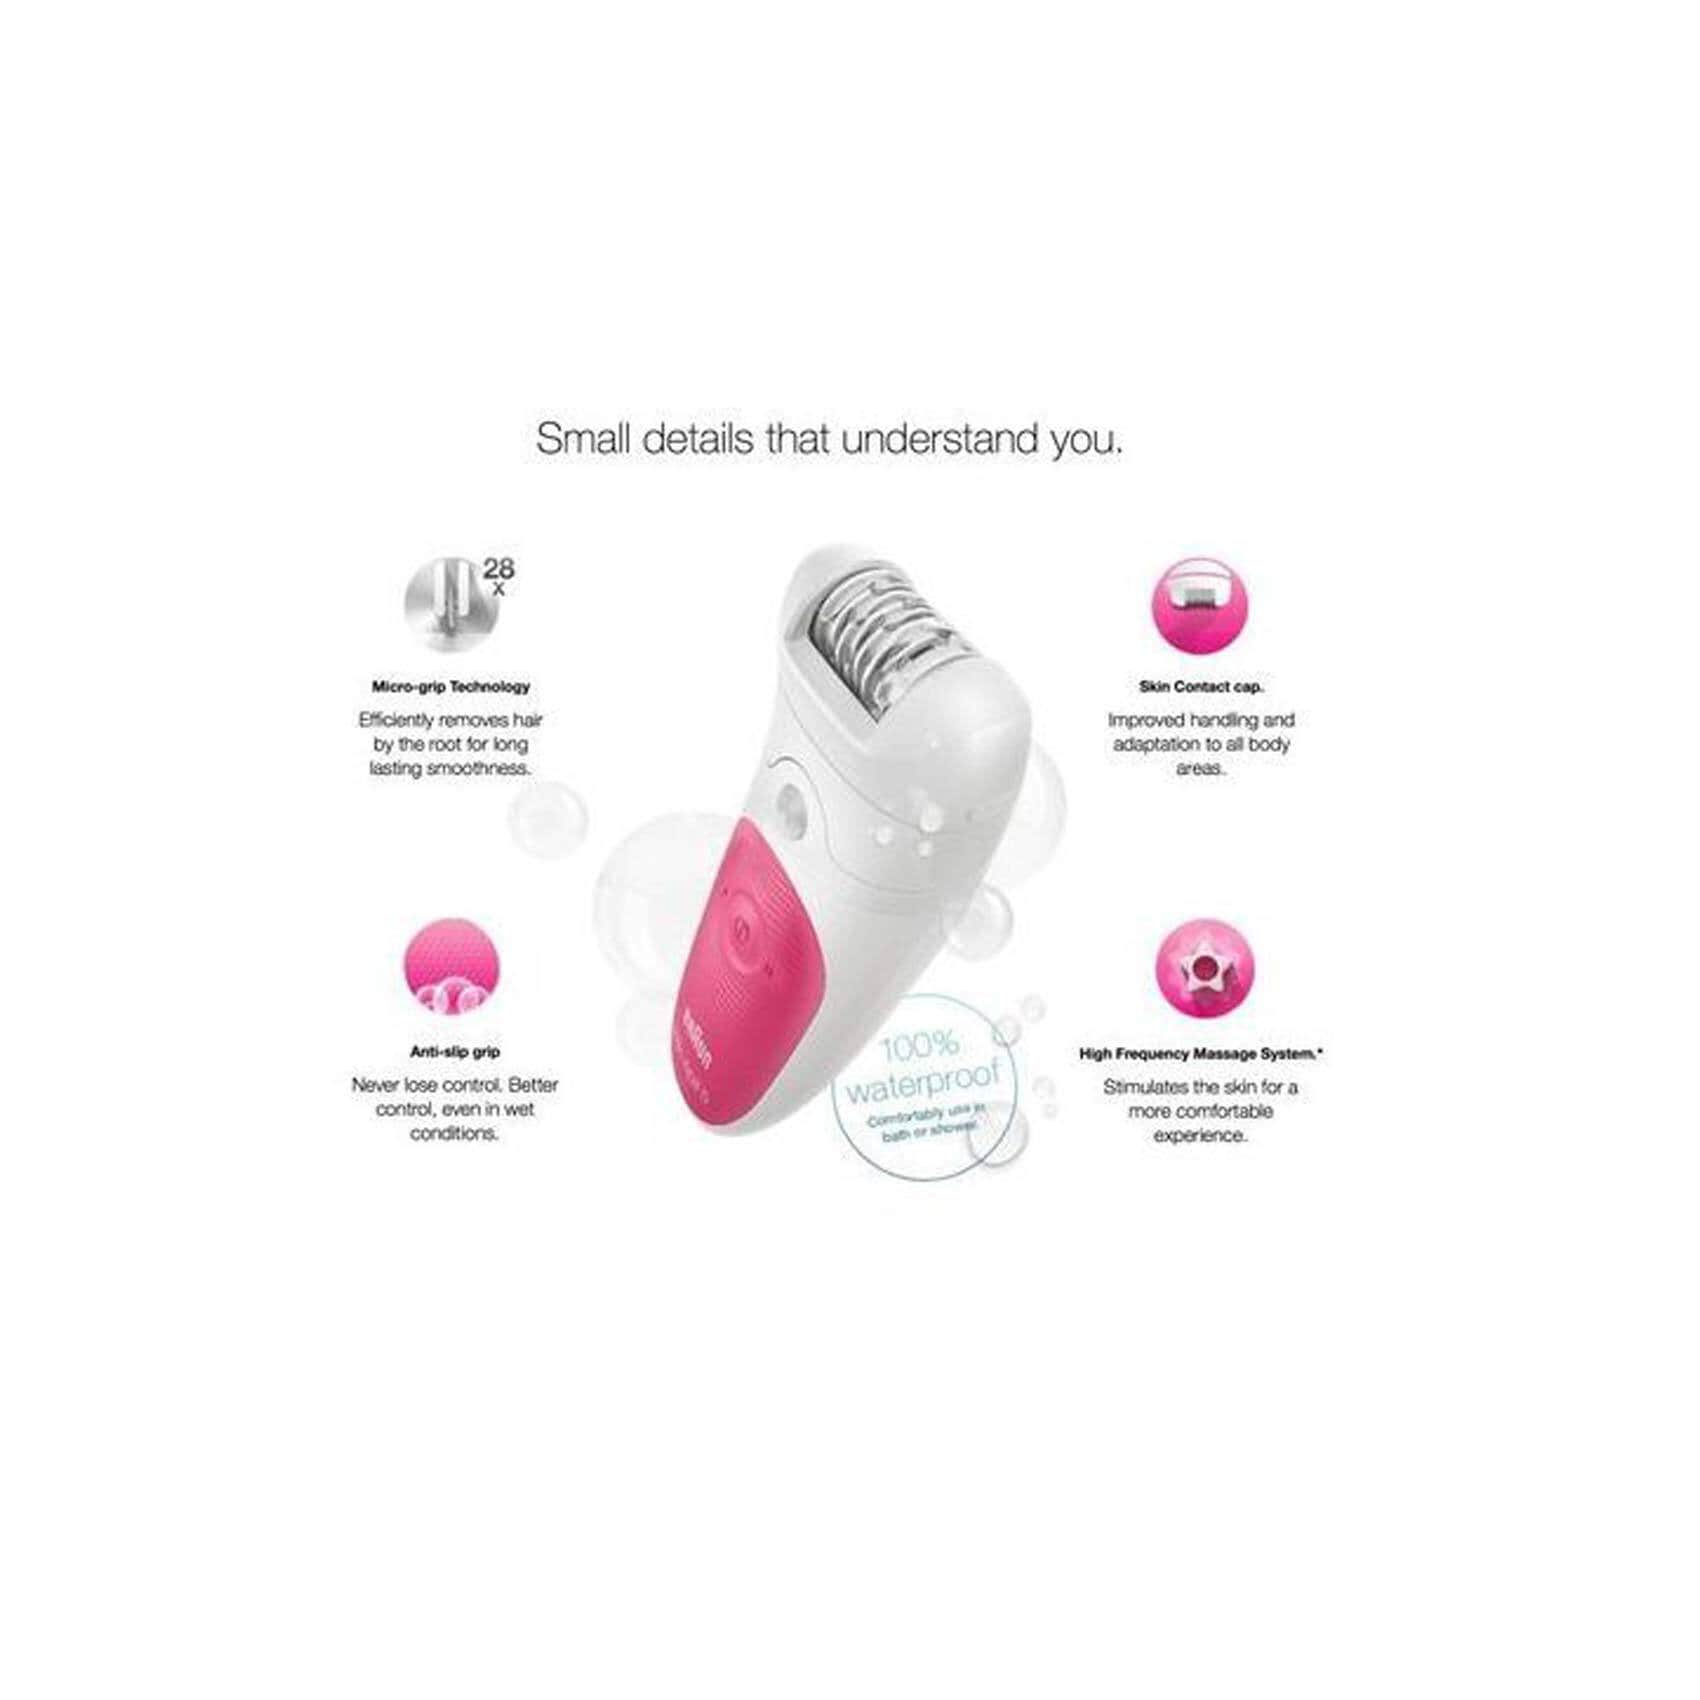 Buy Braun 5-513 Silk Shop Cordless Epil Wet Epilator Beauty Care - and 5 Personal Pink & Carrefour Online on - Egypt Dry